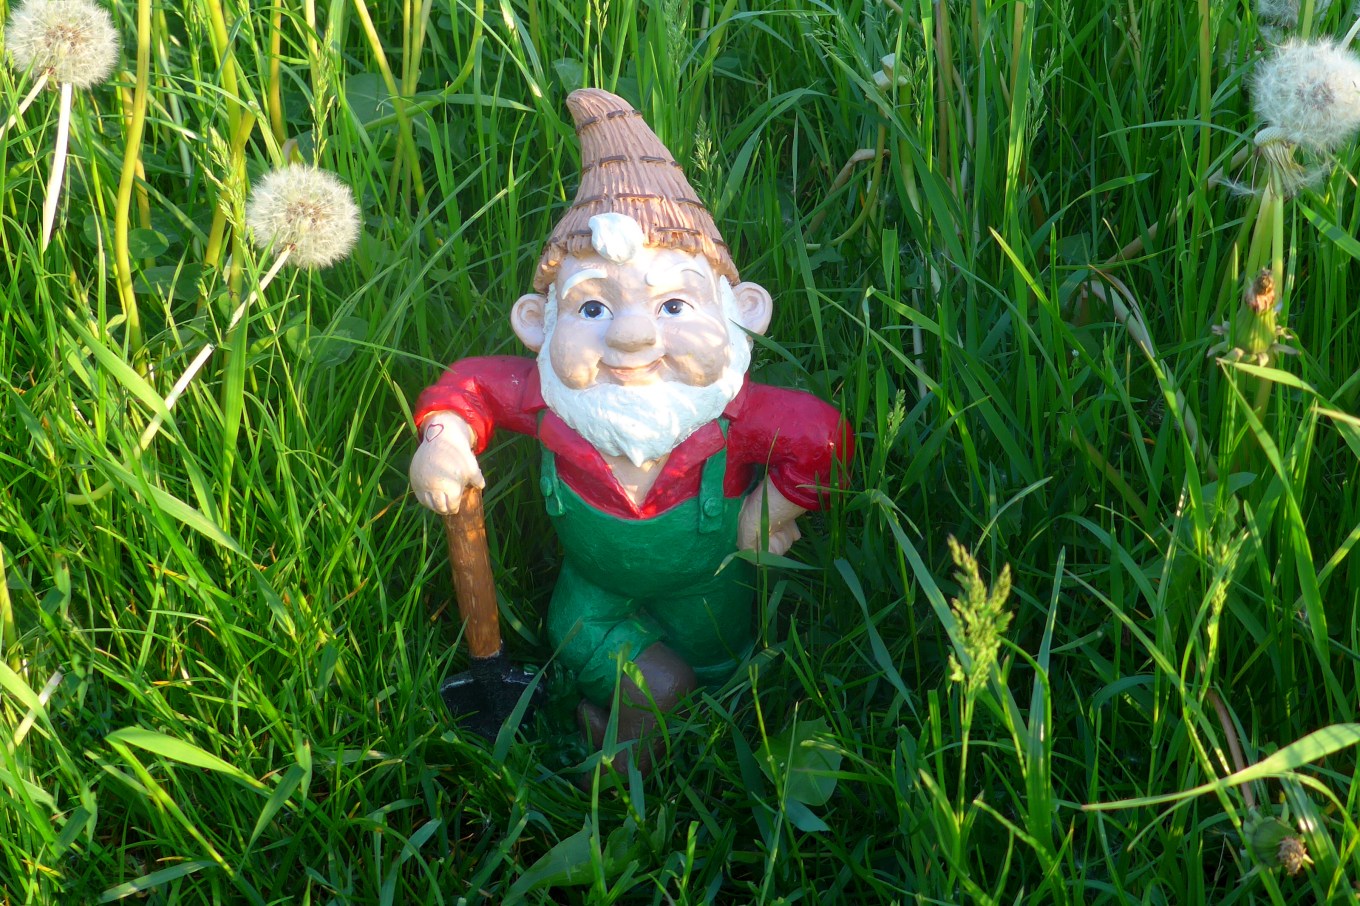 Lawn gnome in red shirt and green overalls leaning on axe